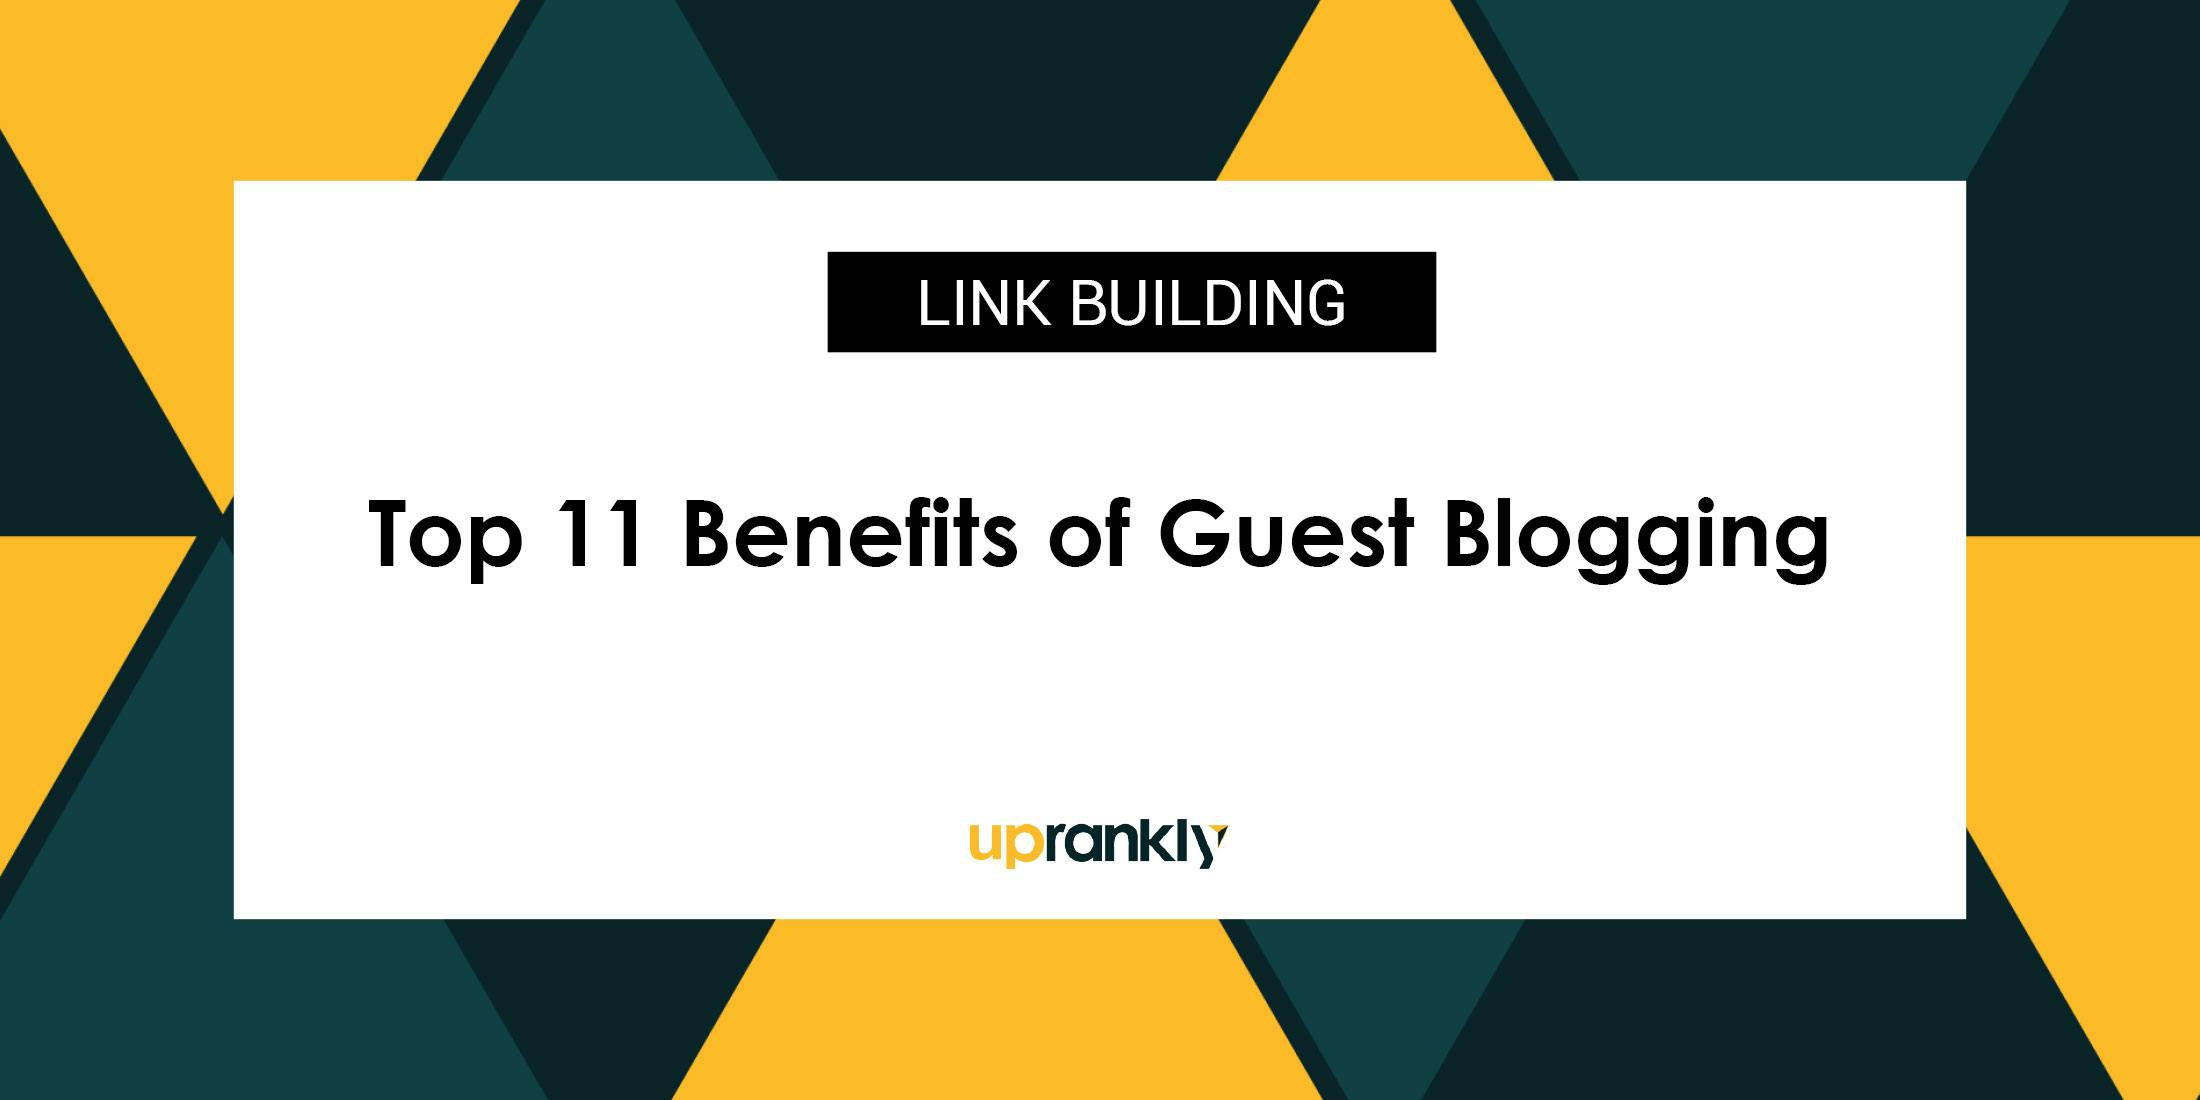 The Top 11 Benefits of Guest Blogging